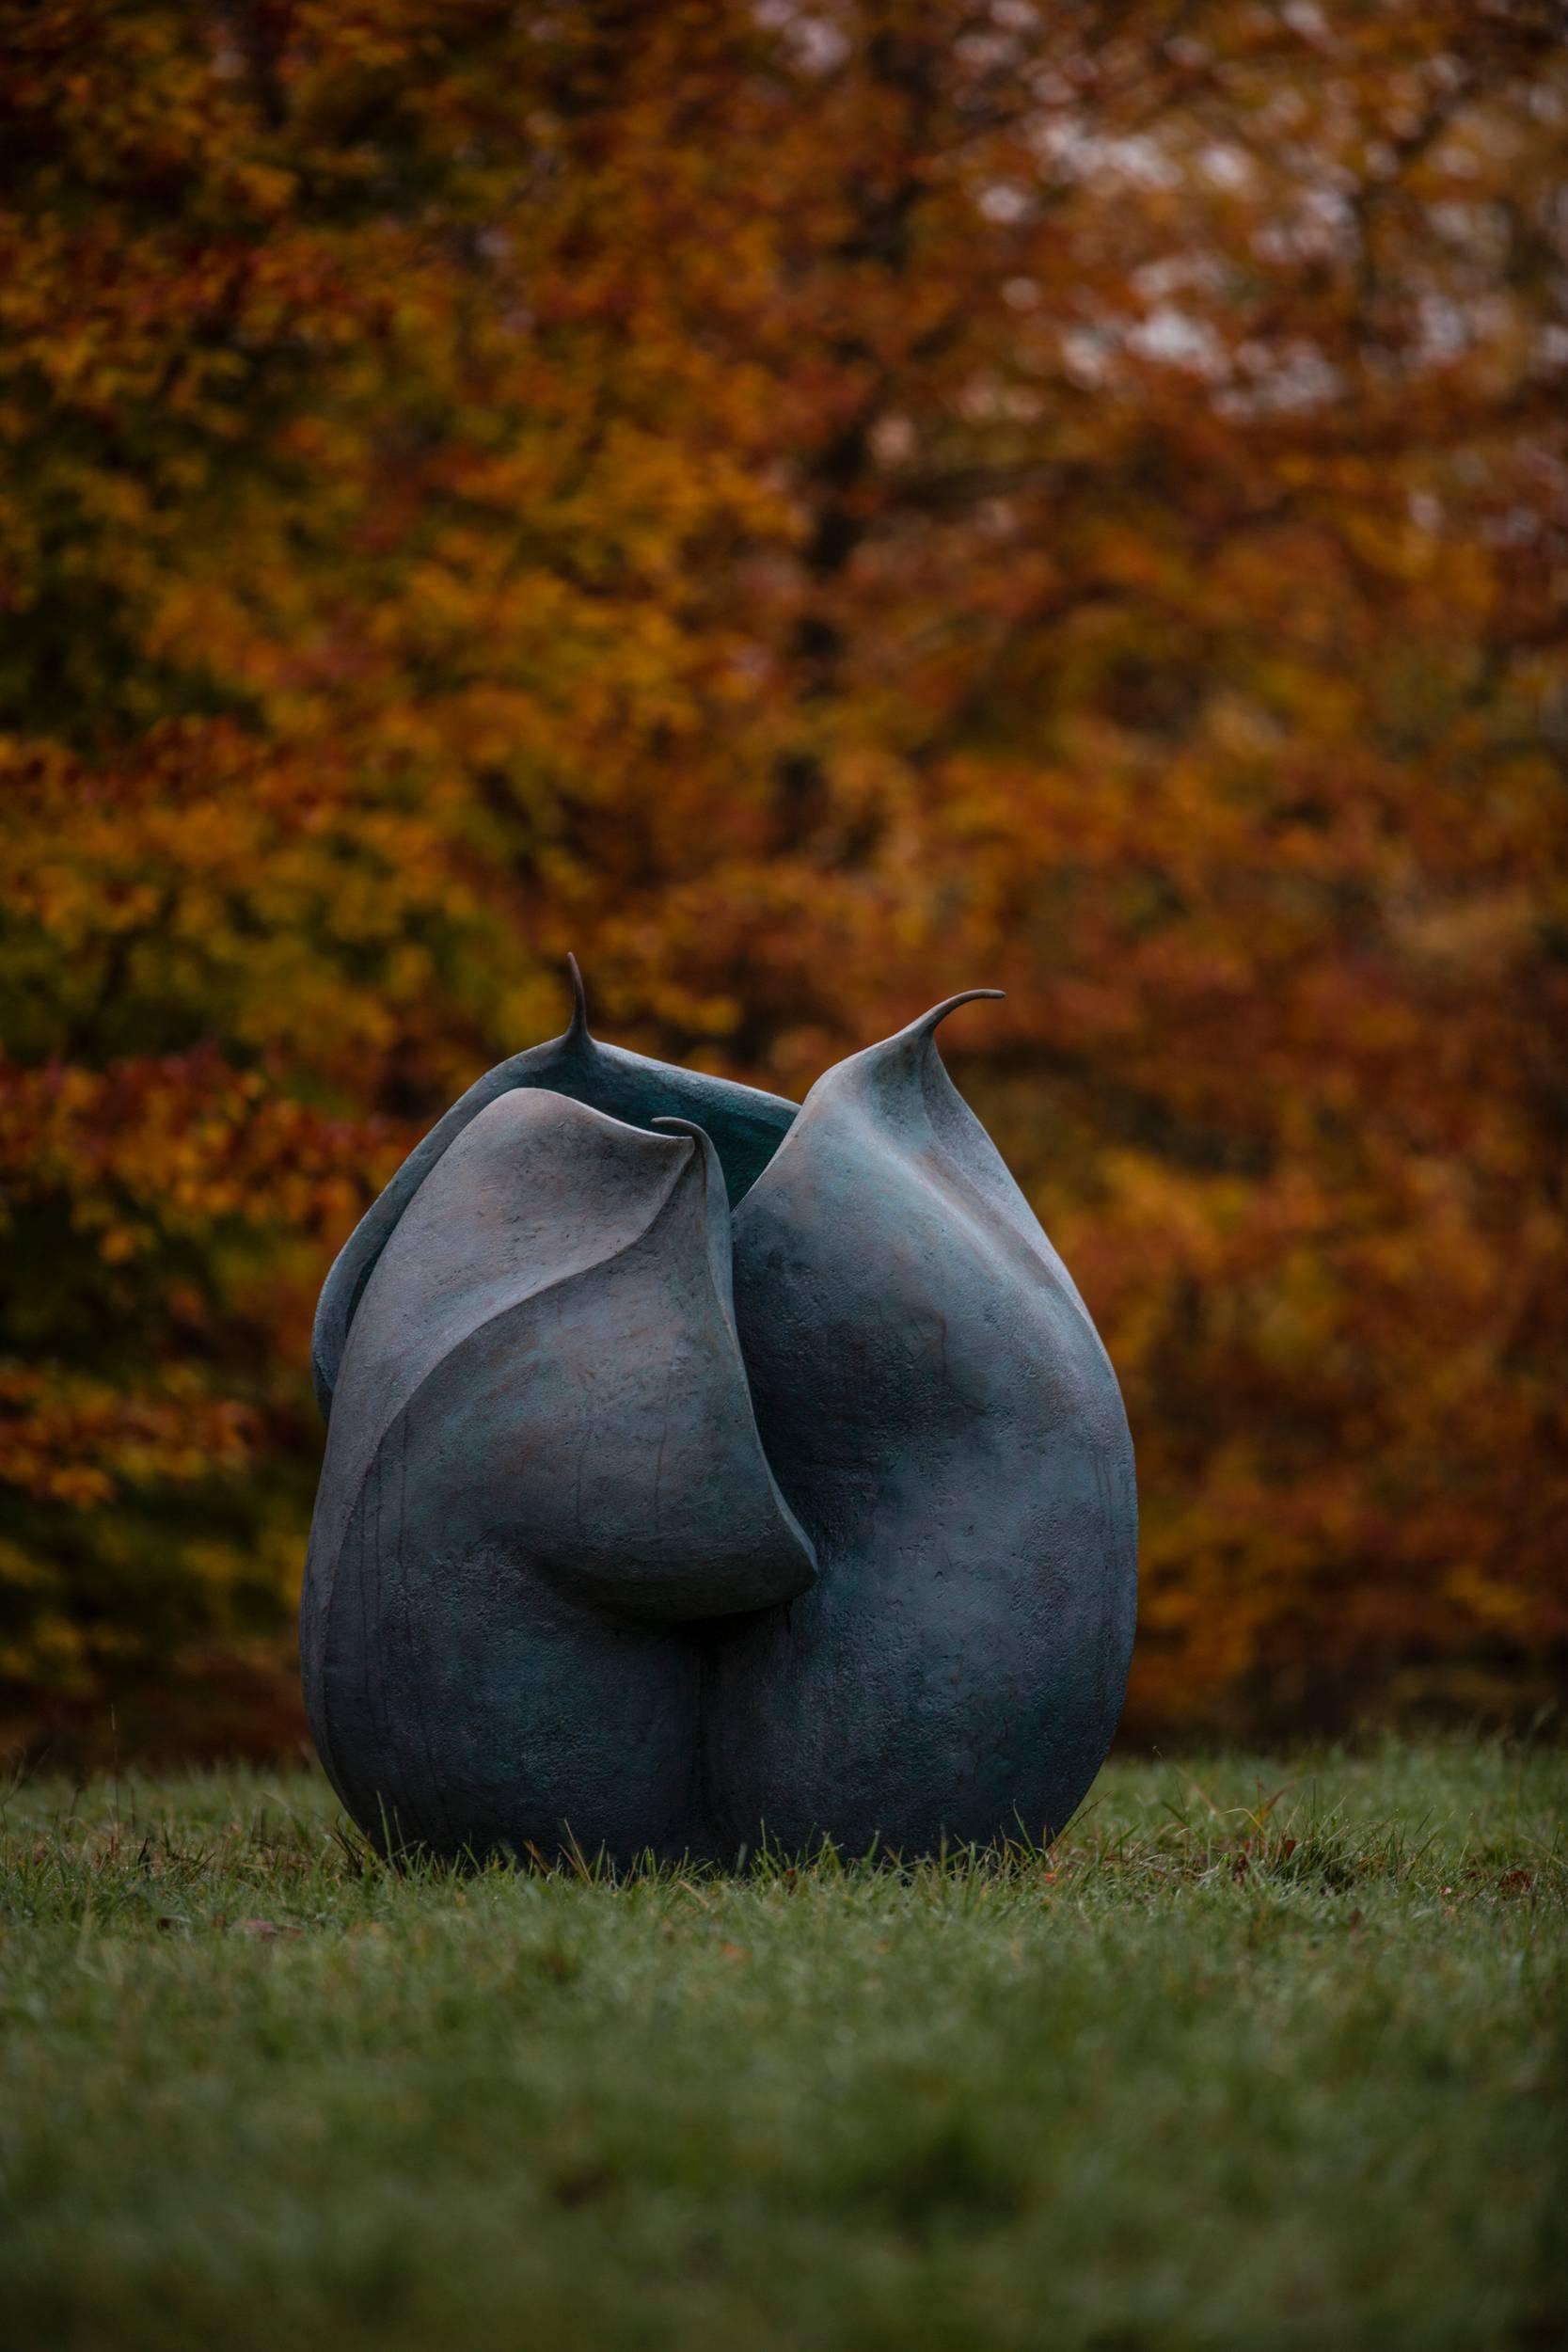 Anne Curry is a member of the Royal British Society of Sculptors. Her outdoor sculpture has been exhibited at major exhibition gardens around the UK including the Royal Botanic Gardens at Kew, has featured at the Venice Biennale and can be found in